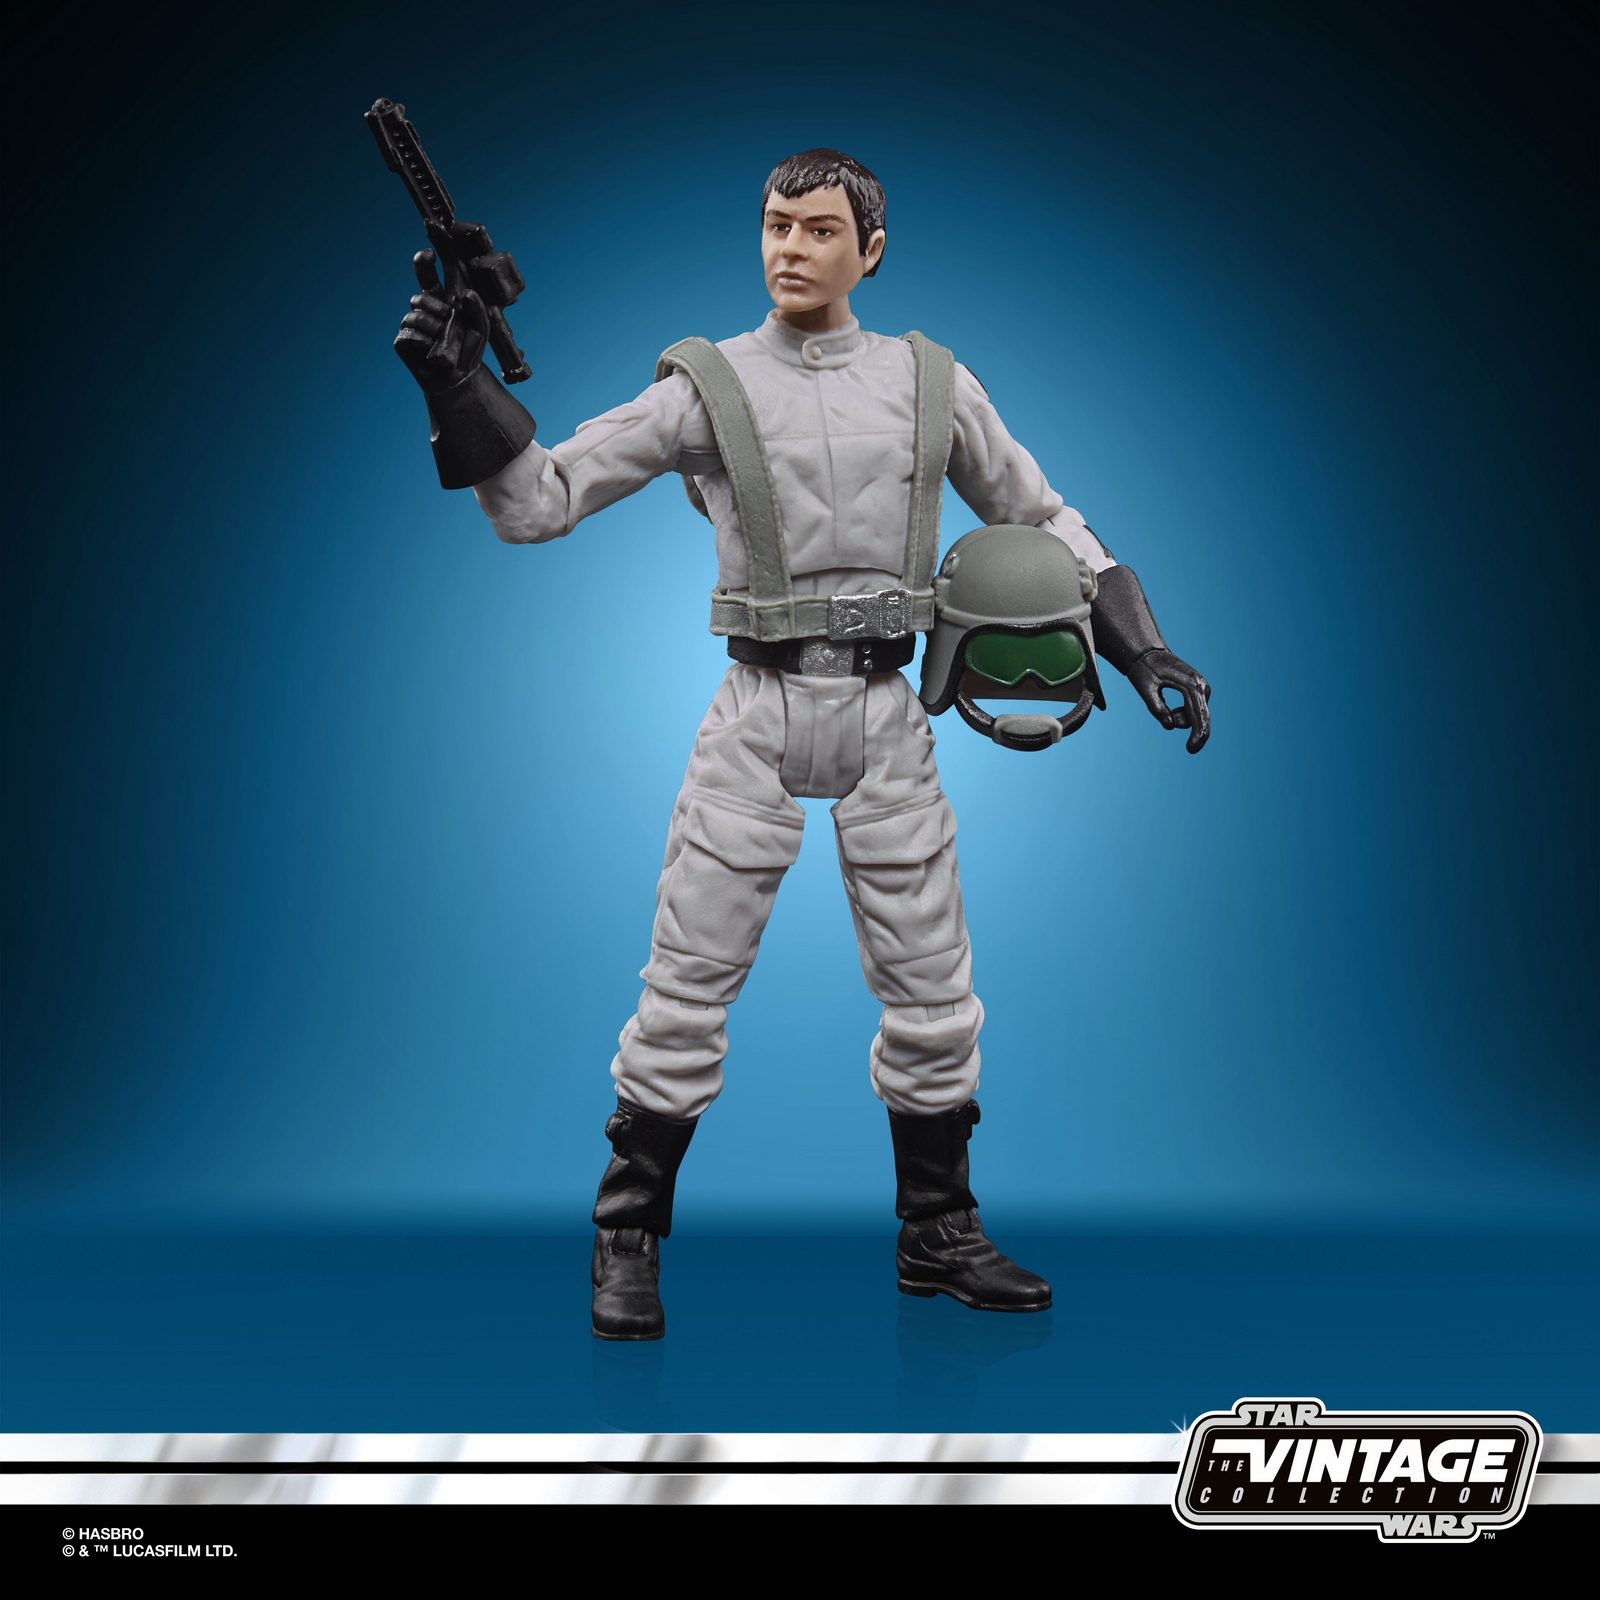 STAR WARS THE VINTAGE COLLECTION LUCASFILM FIRST 50 YEARS 3.75-INCH AT-ST DRIVER Figure - oop (2).jpg